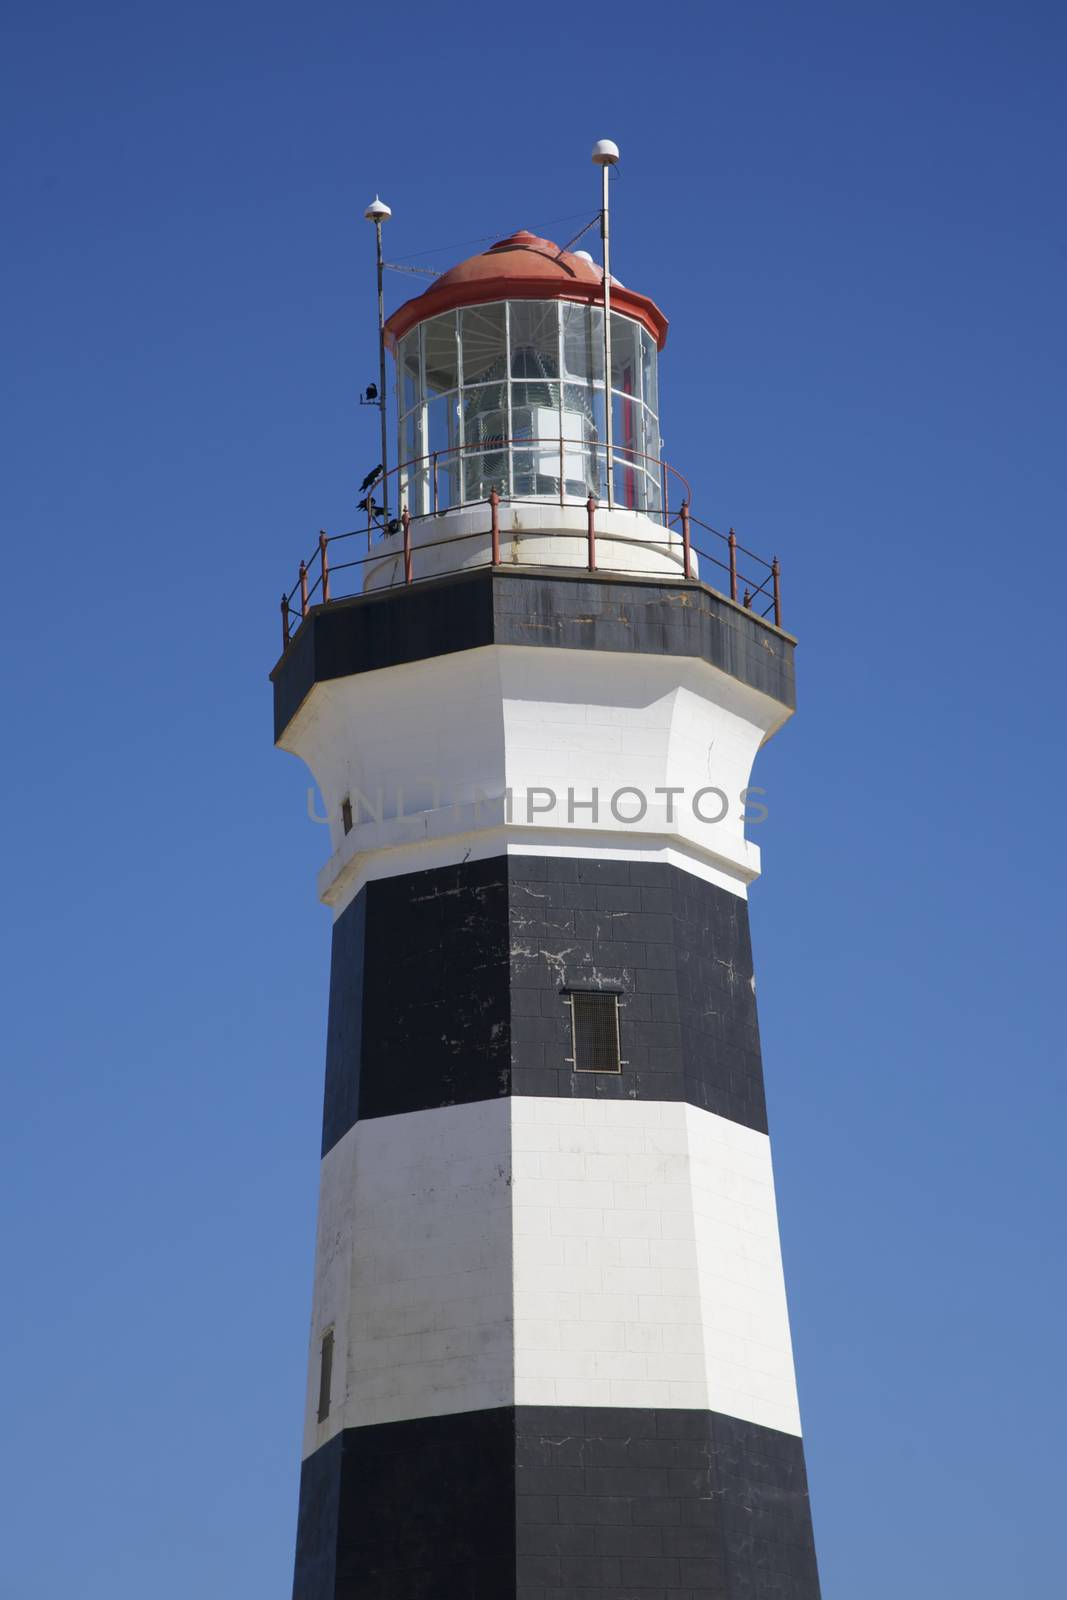 Black and White Lighthouse Called Cape Recife Lighthouse Build in 1849 Port Elizabeth South Africa